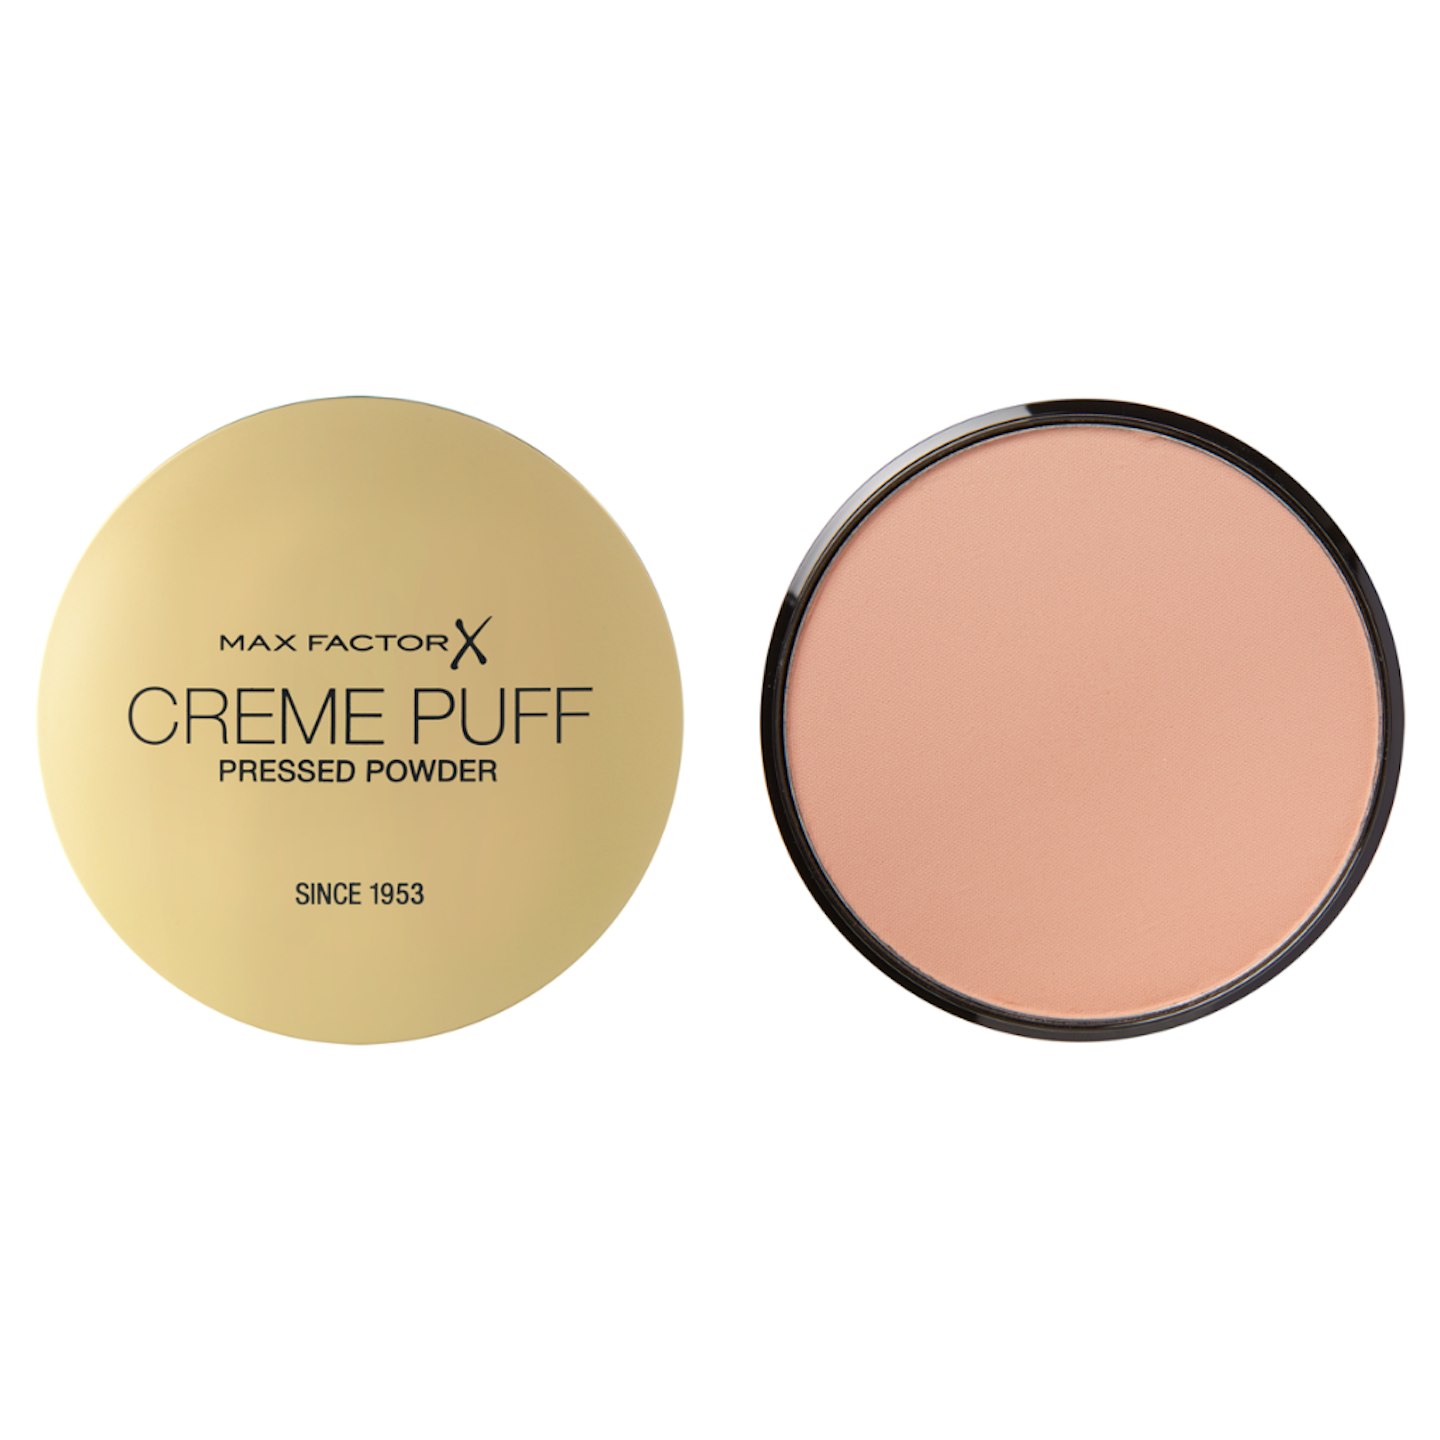 Max Factor Cream Puff Pressed Compact Powder, 21 g in shade 50 - Natural